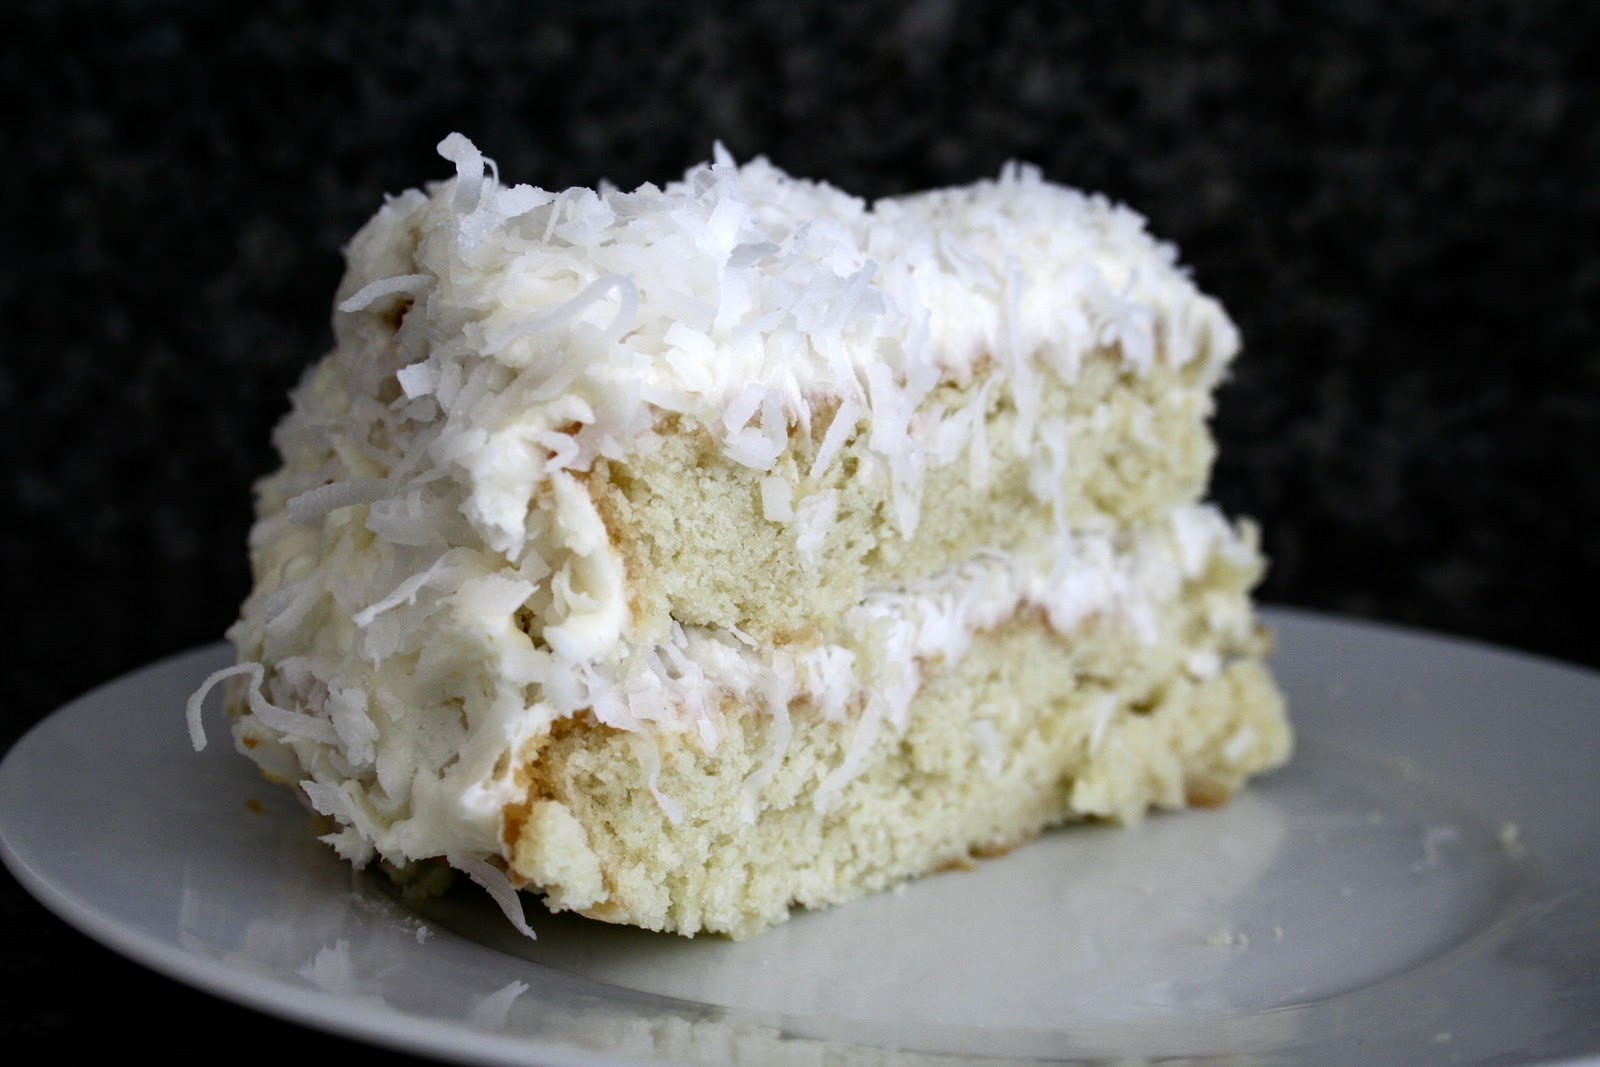 broma bakery: The best coconut cake in the world